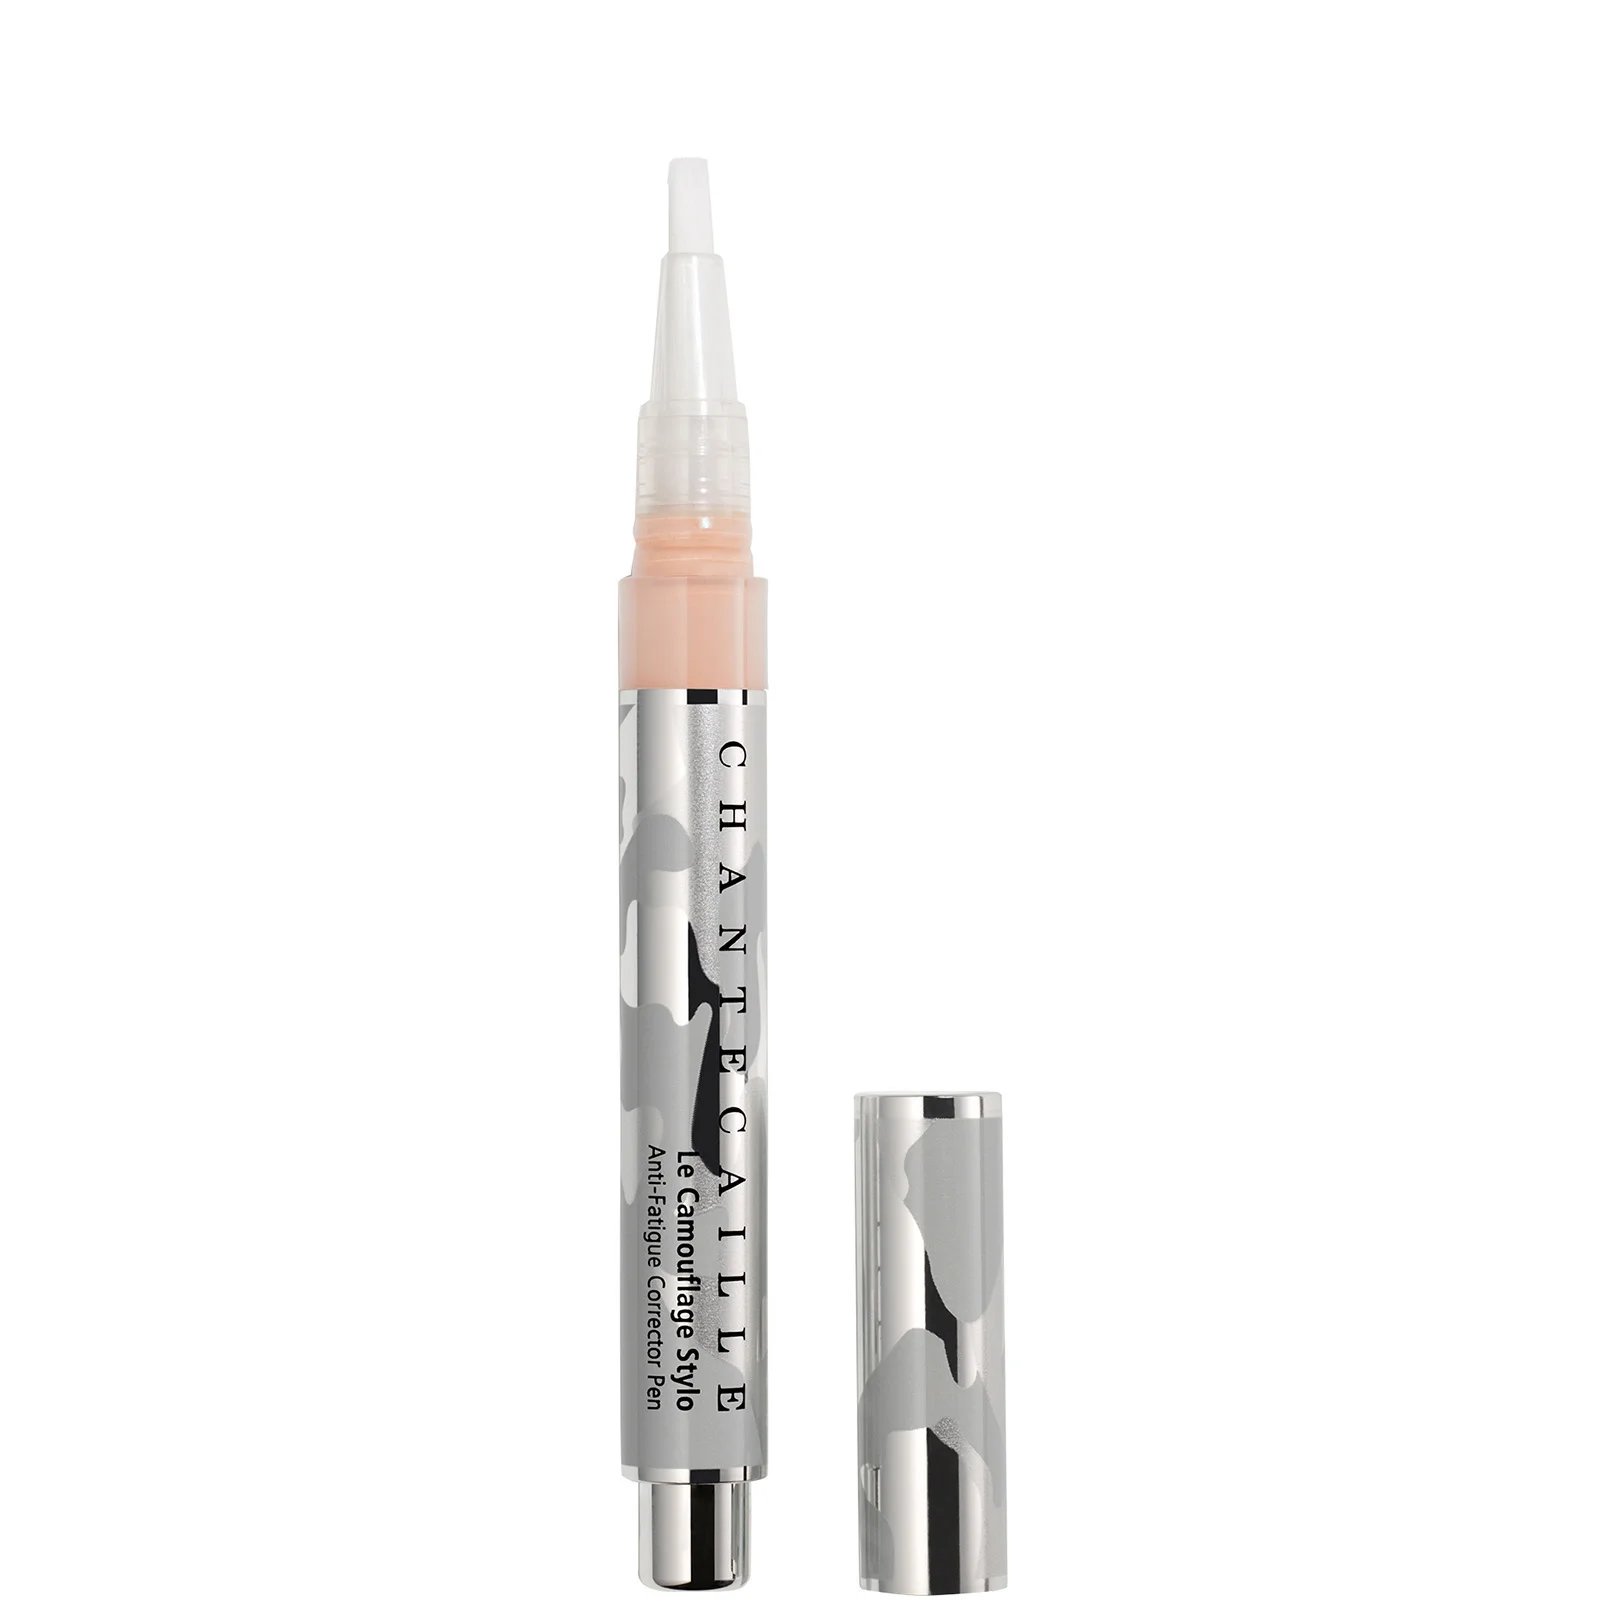 Chantecaille Le Camouflage Stylo Concealer Image 1